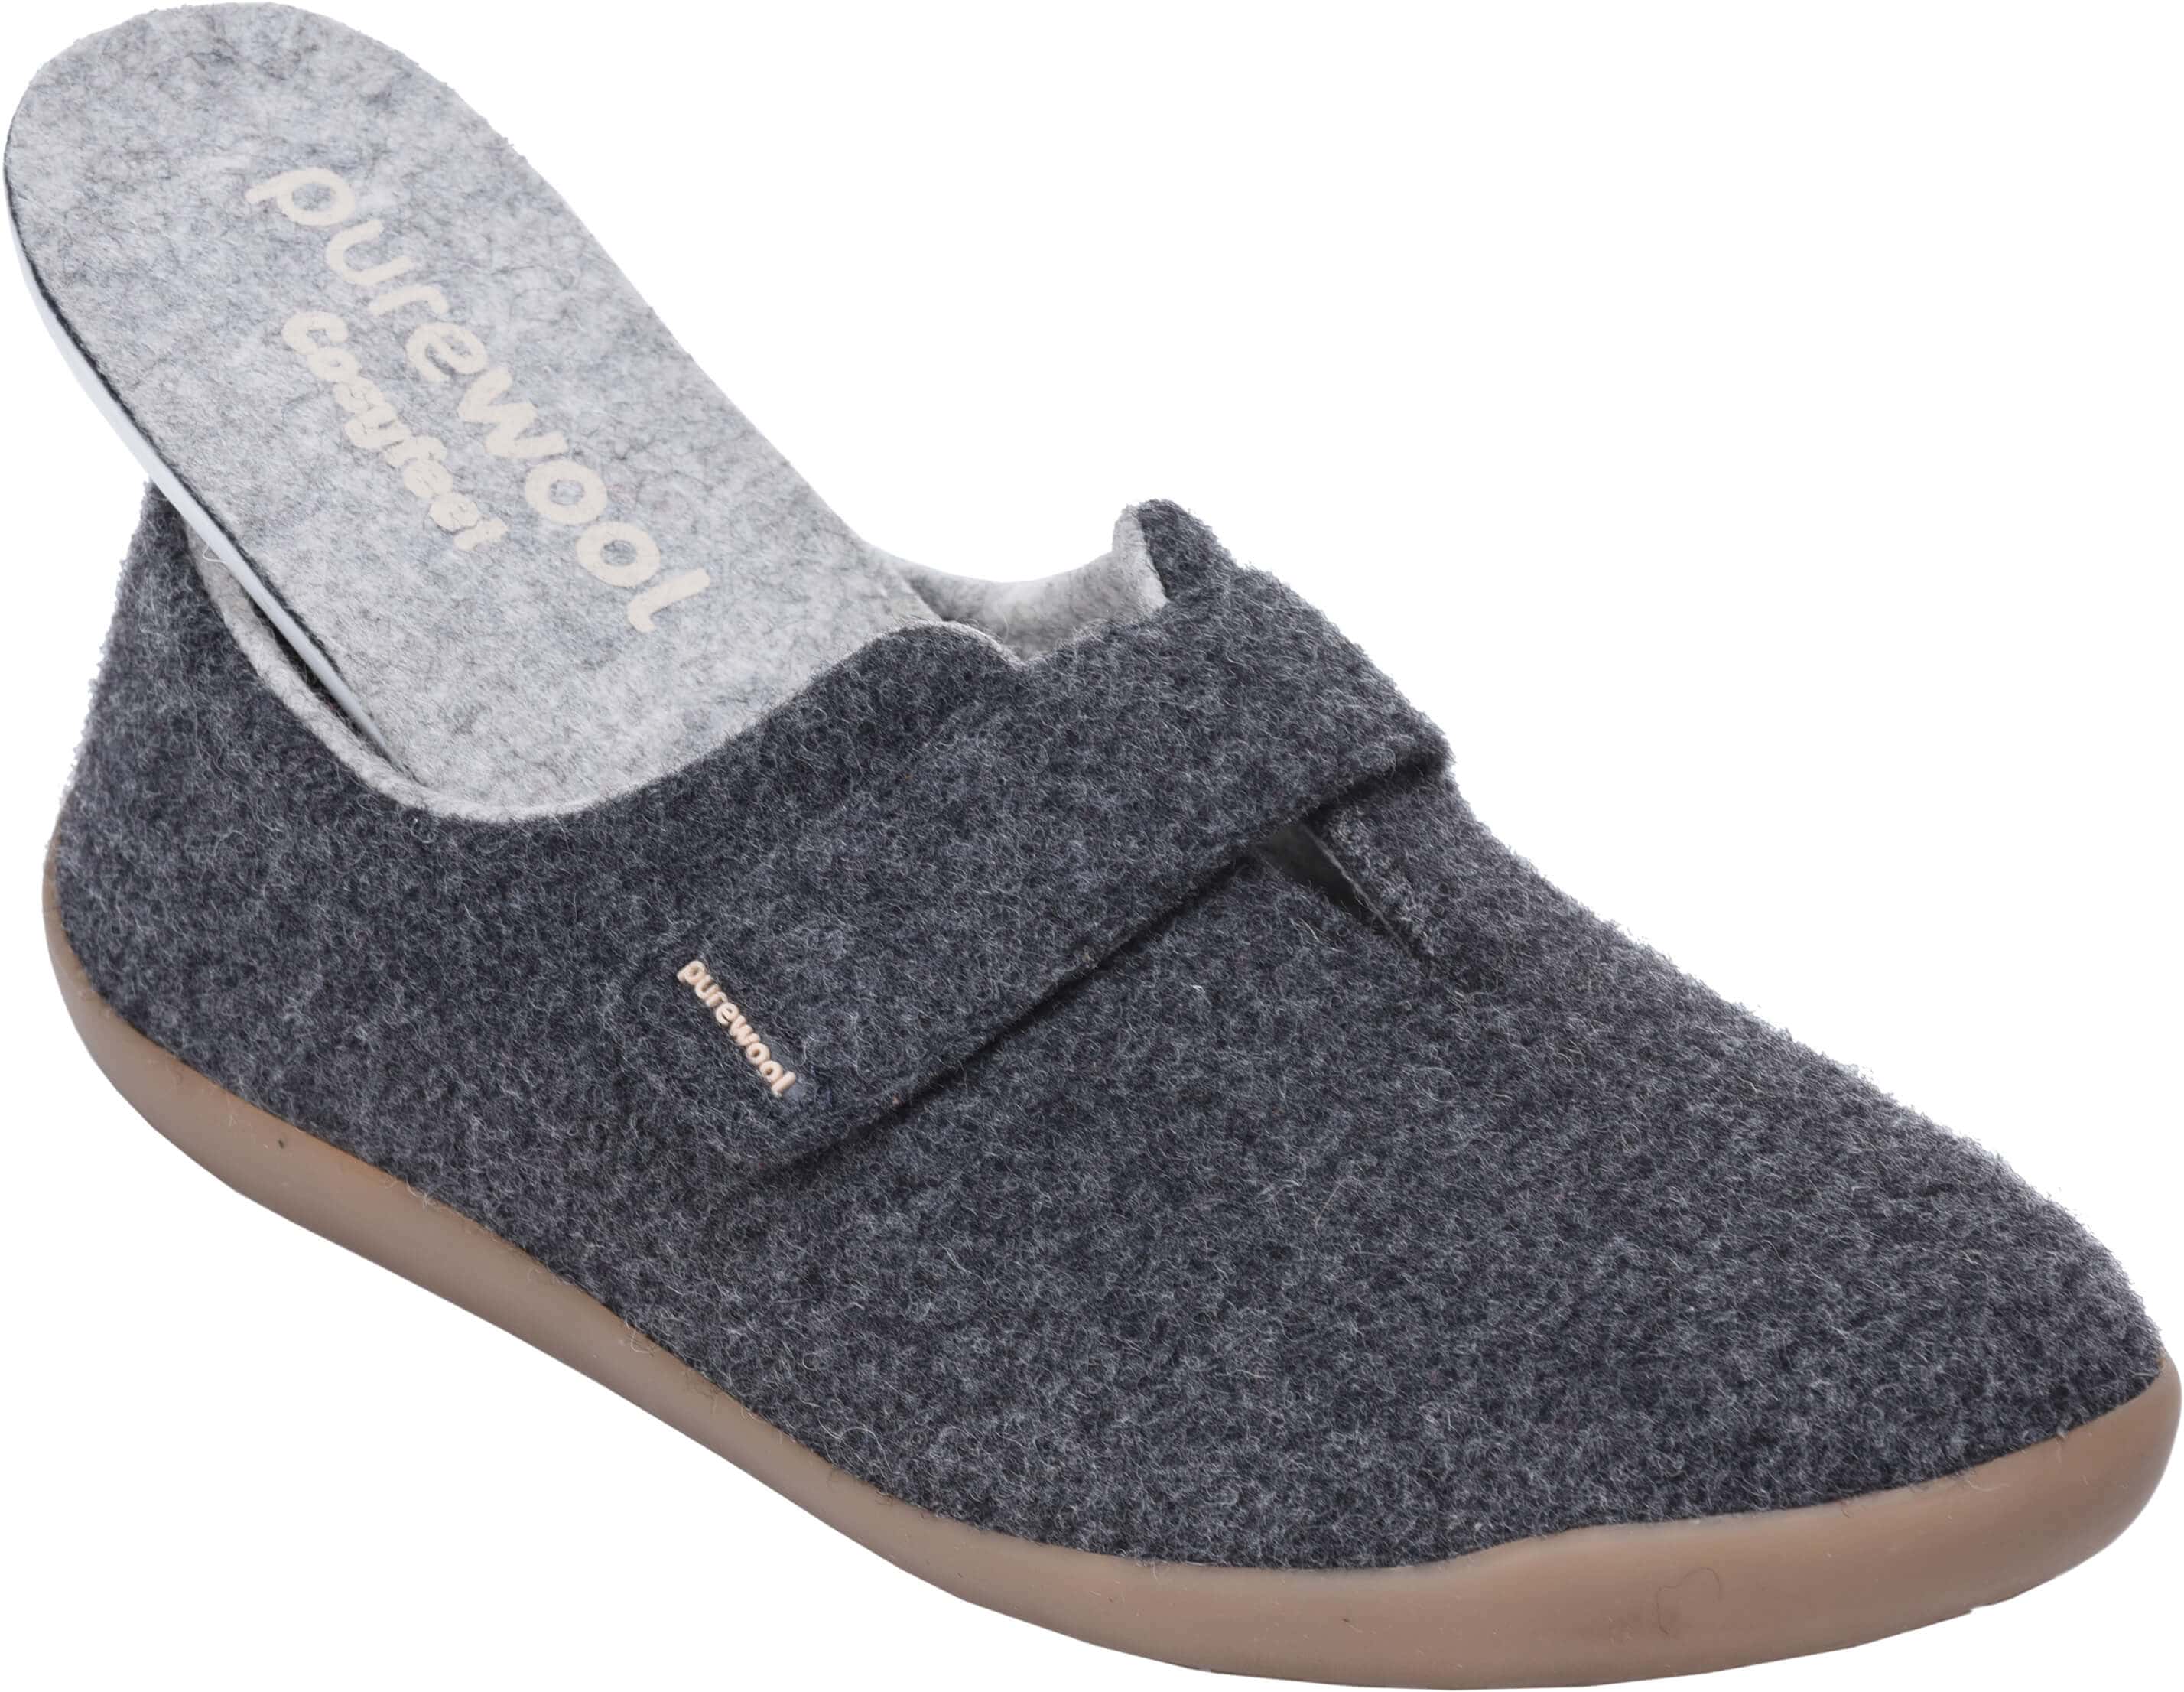 cosyfeet mens slippers